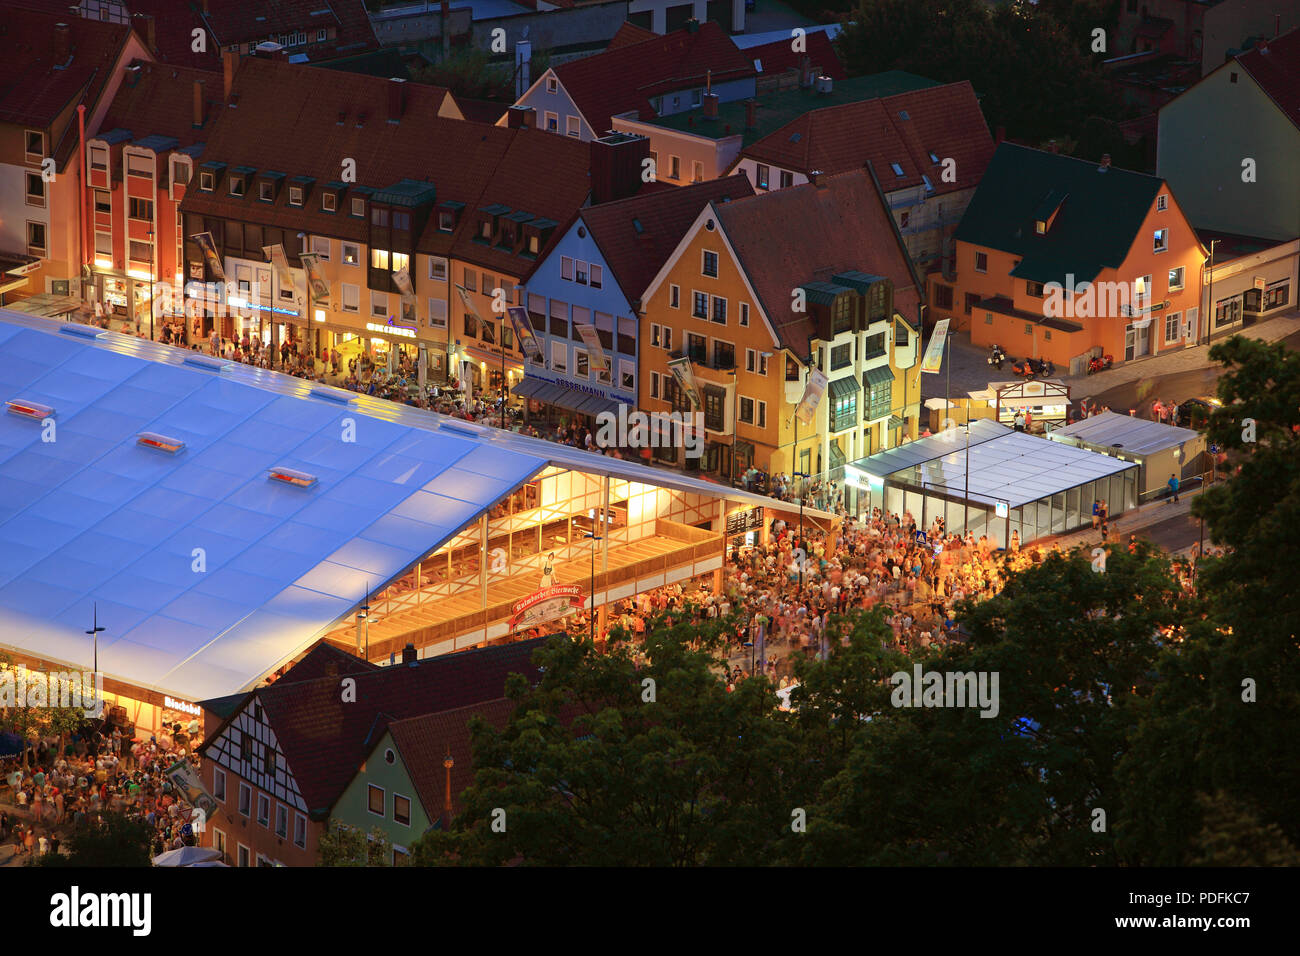 annual Beer Festival with the new festival tent from 2018, Kulmbach, Upper Franconia, Bavaria, Germany Stock Photo